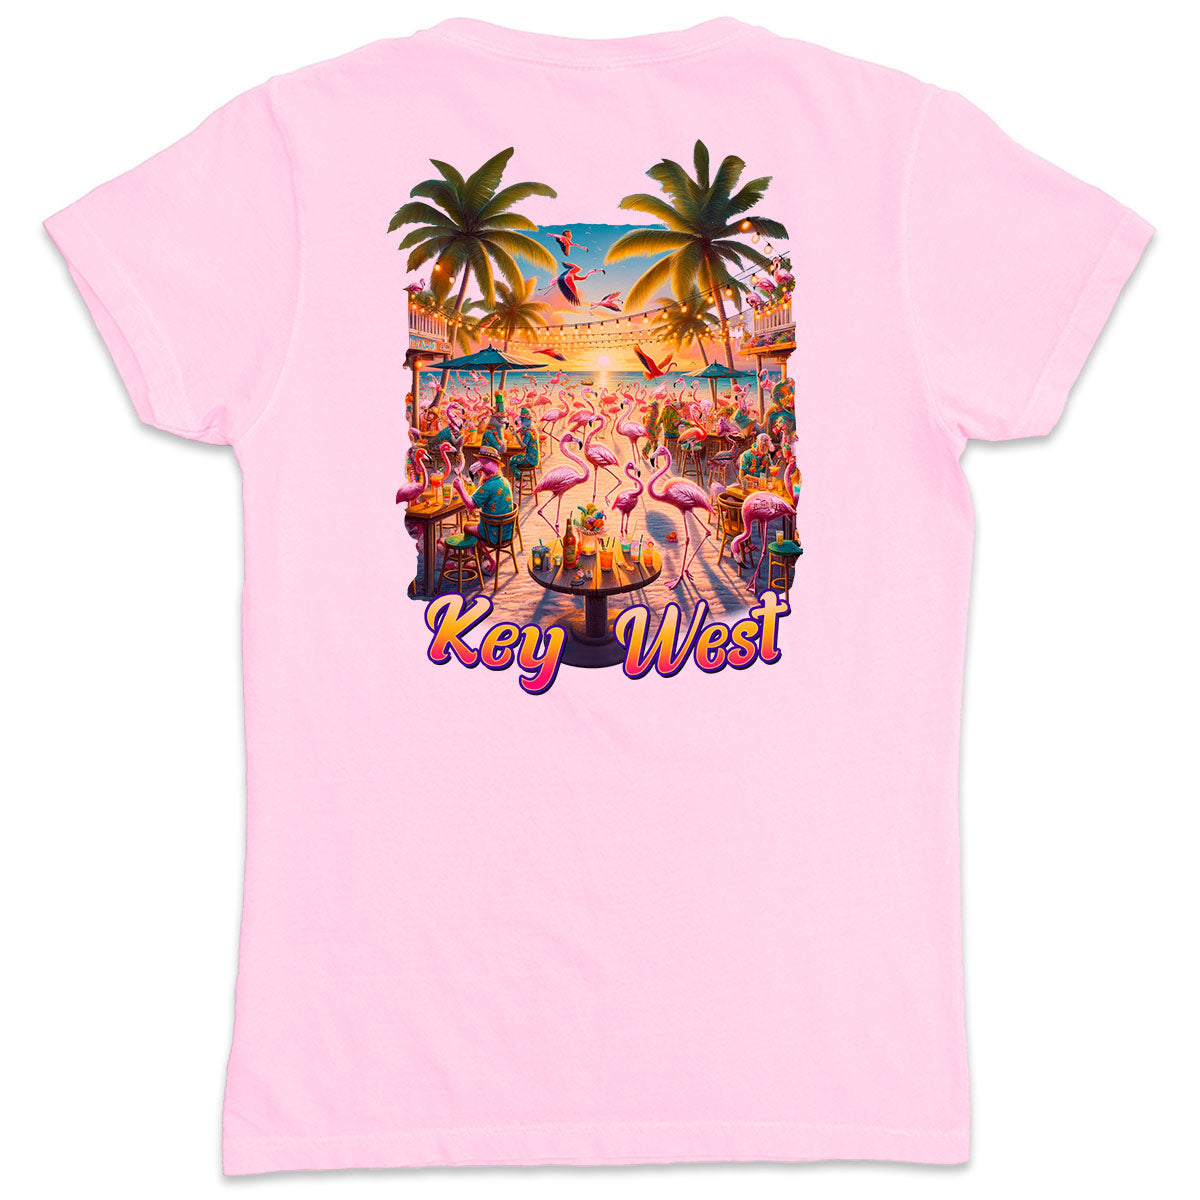 Women's Key West Flamingo Party V-Neck T-Shirt Light Pink. . Showing lots of flamingos having a party on the shores of key West. Drinking lots of concoctions and enjoying their time with friends.